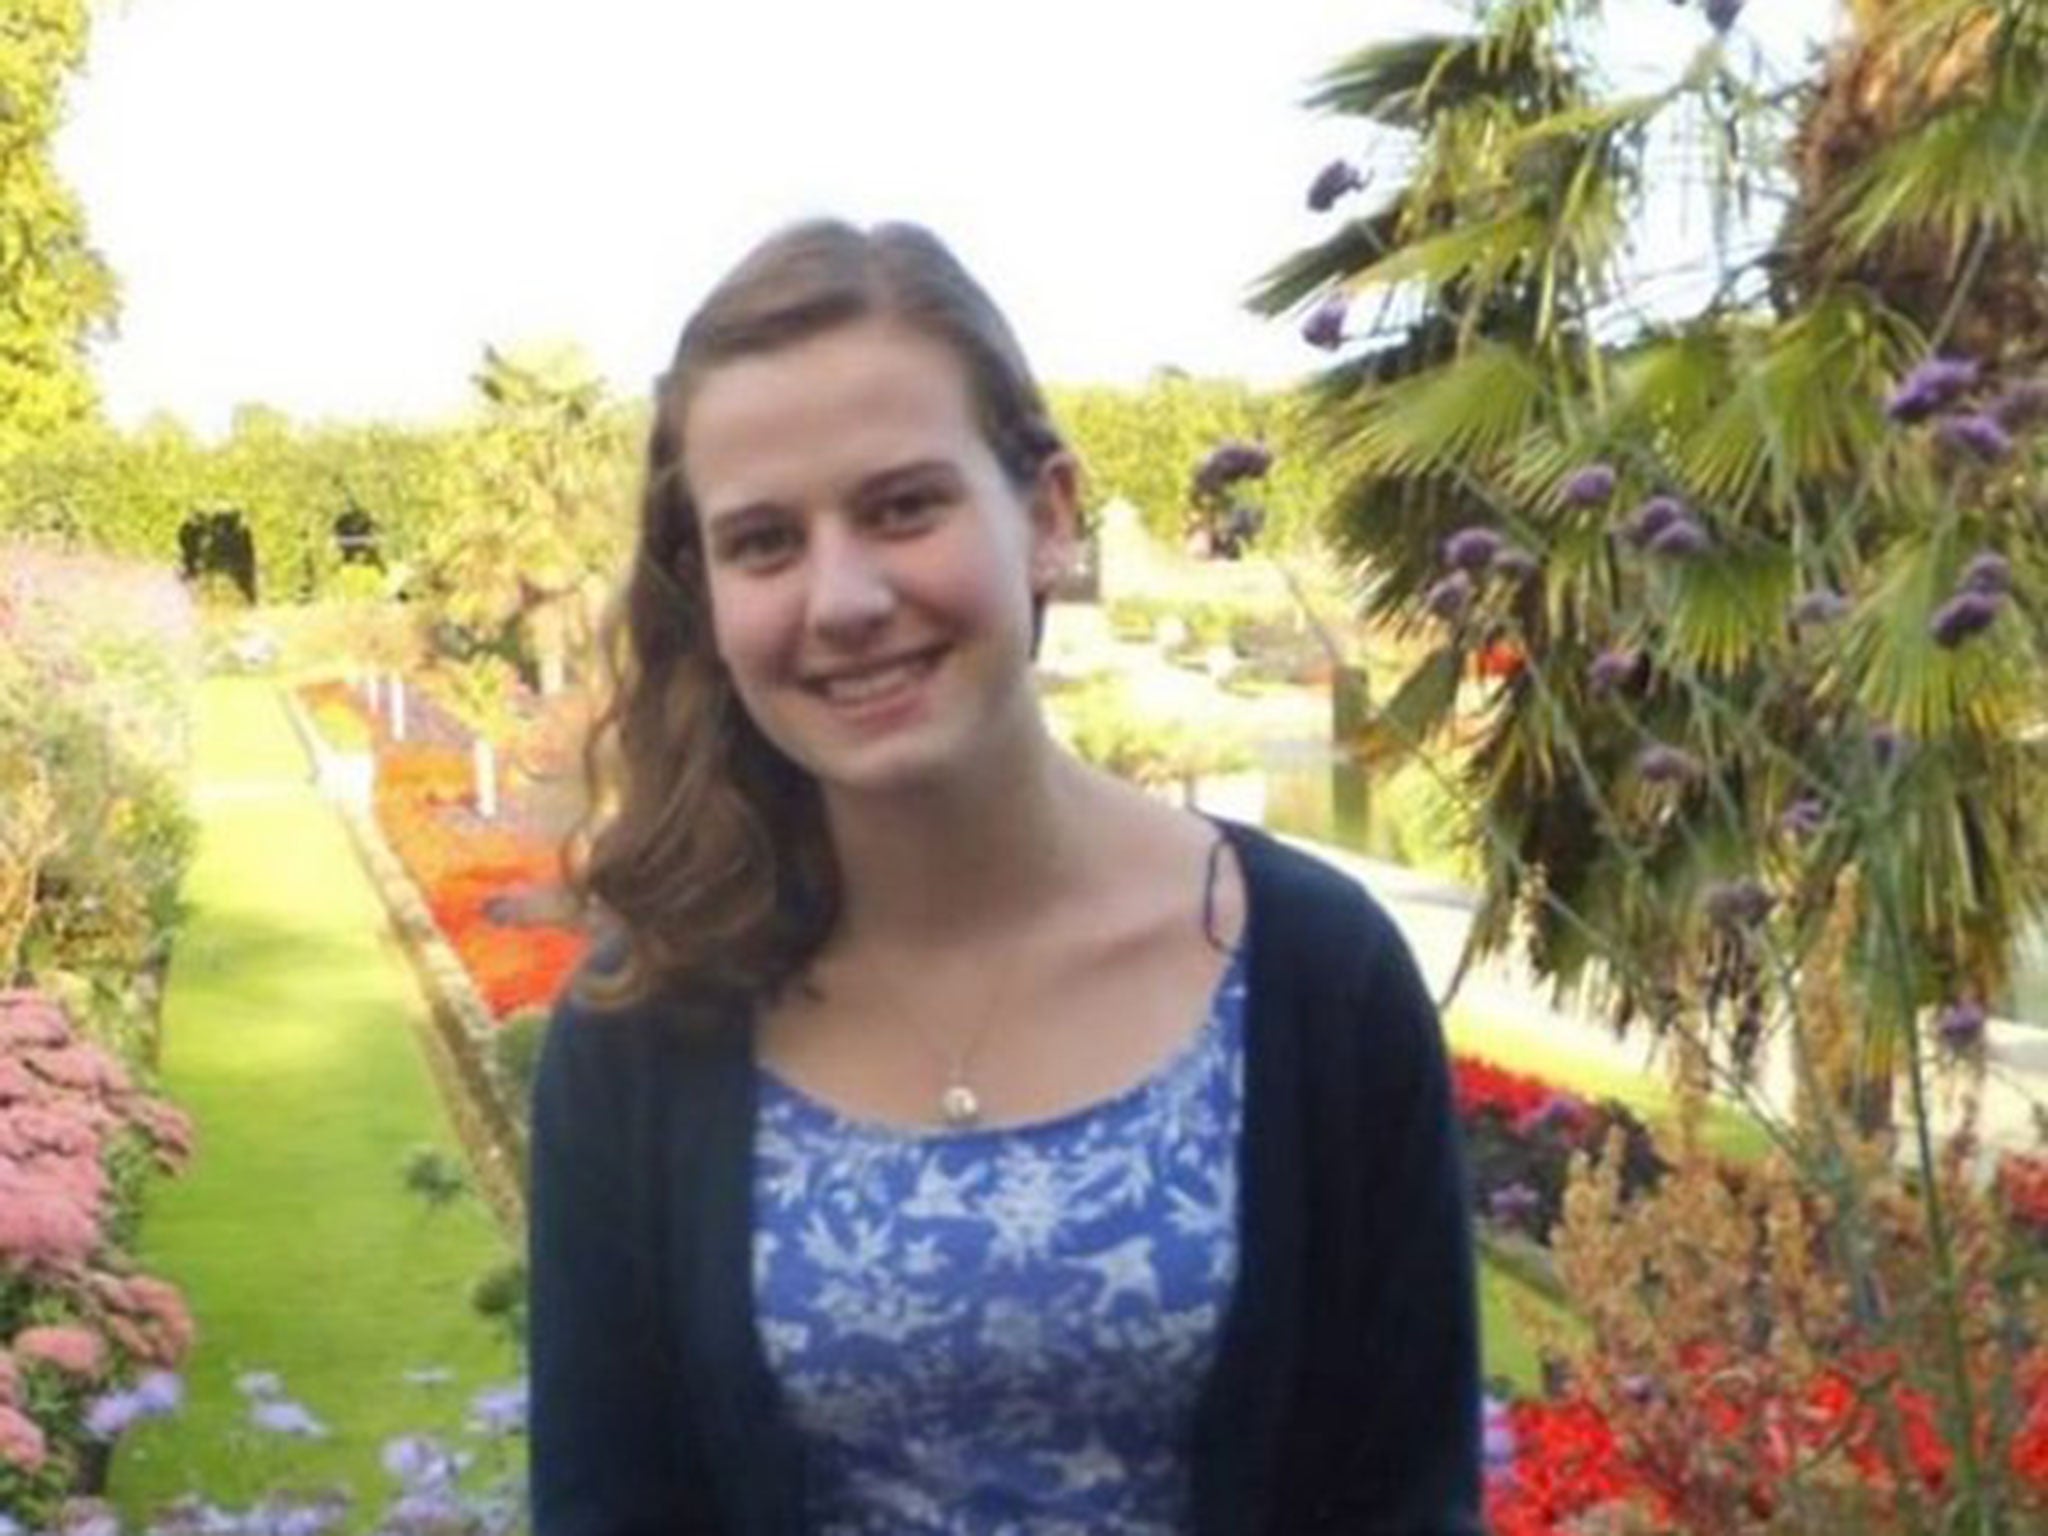 Hannah Stubbs died in August 2015 shortly after police began investigating allegations that she had been raped